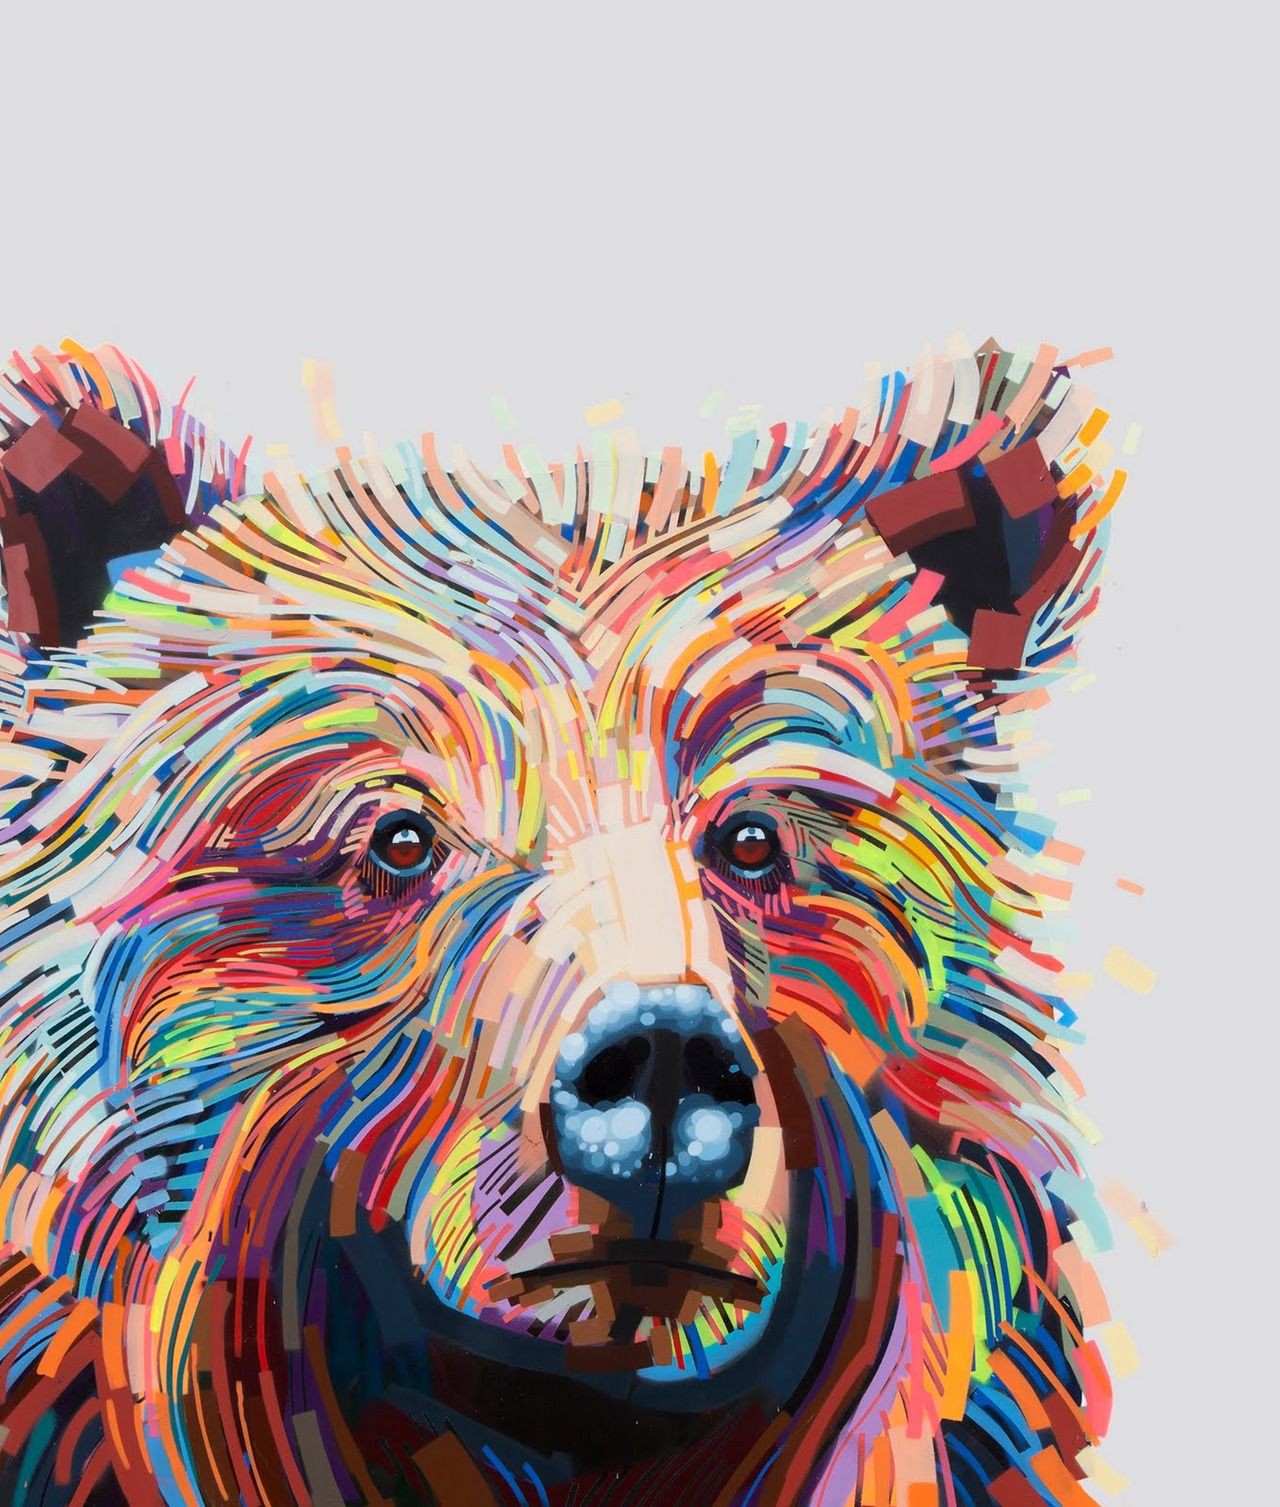 Colorful bear What a beautiful piece of art Love the colors and placement of the shades of pastels Elegant